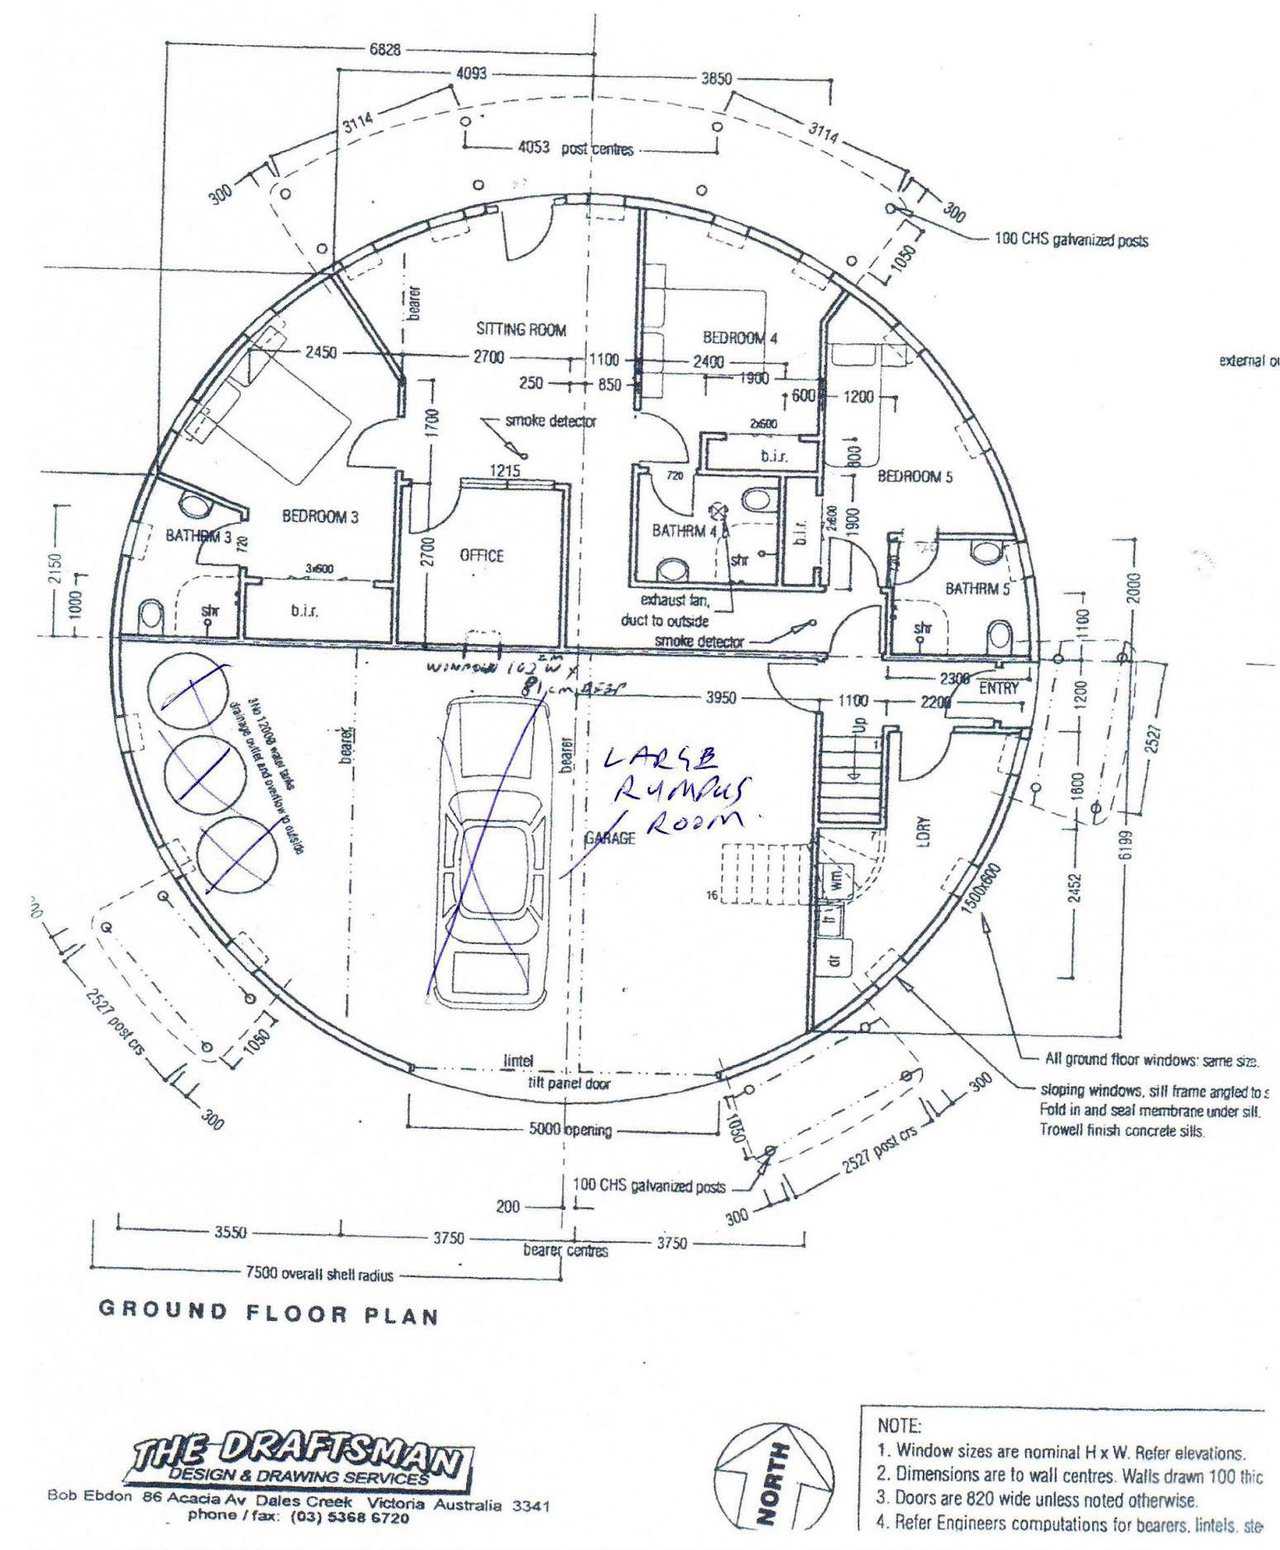 Floor plan of the dome, shown here is the ground floor